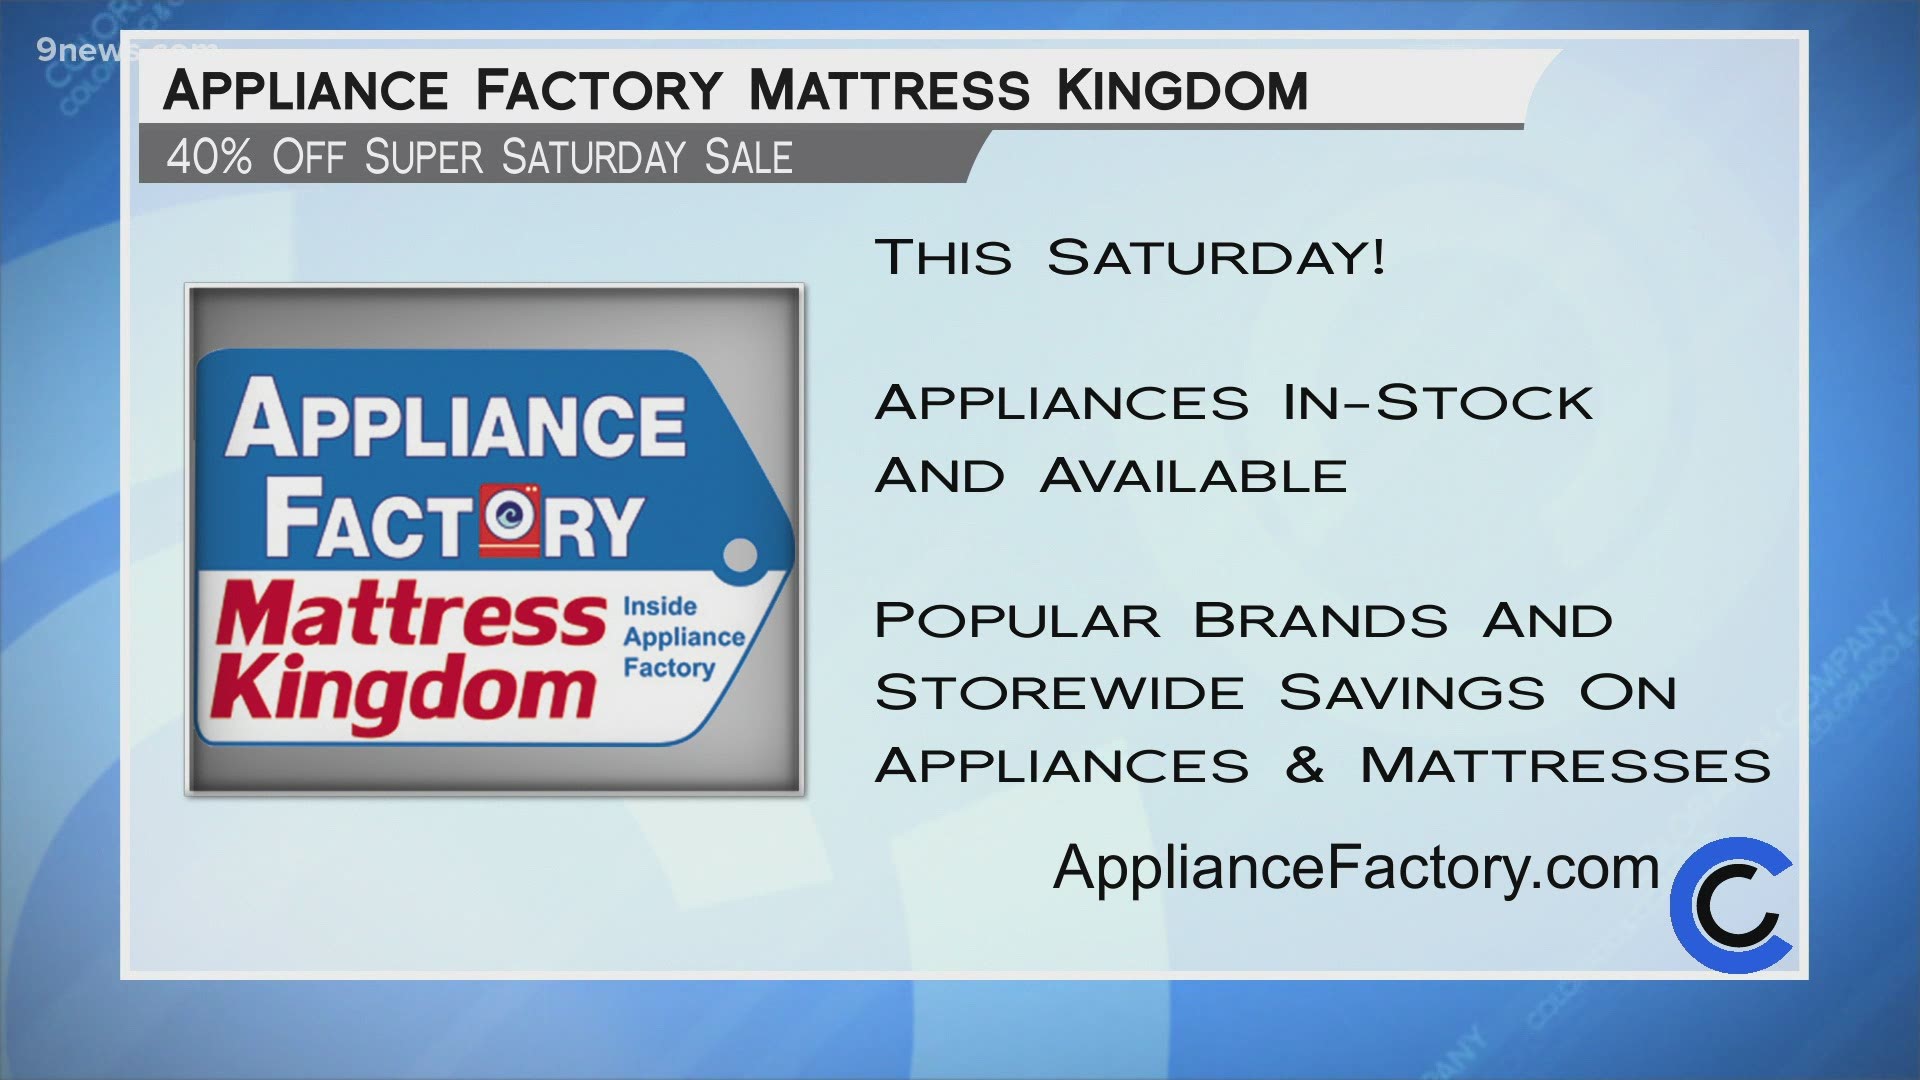 Shop online and save 40% this Saturday at the Super Saturday Sale! Learn more at ApplianceFactory.com.